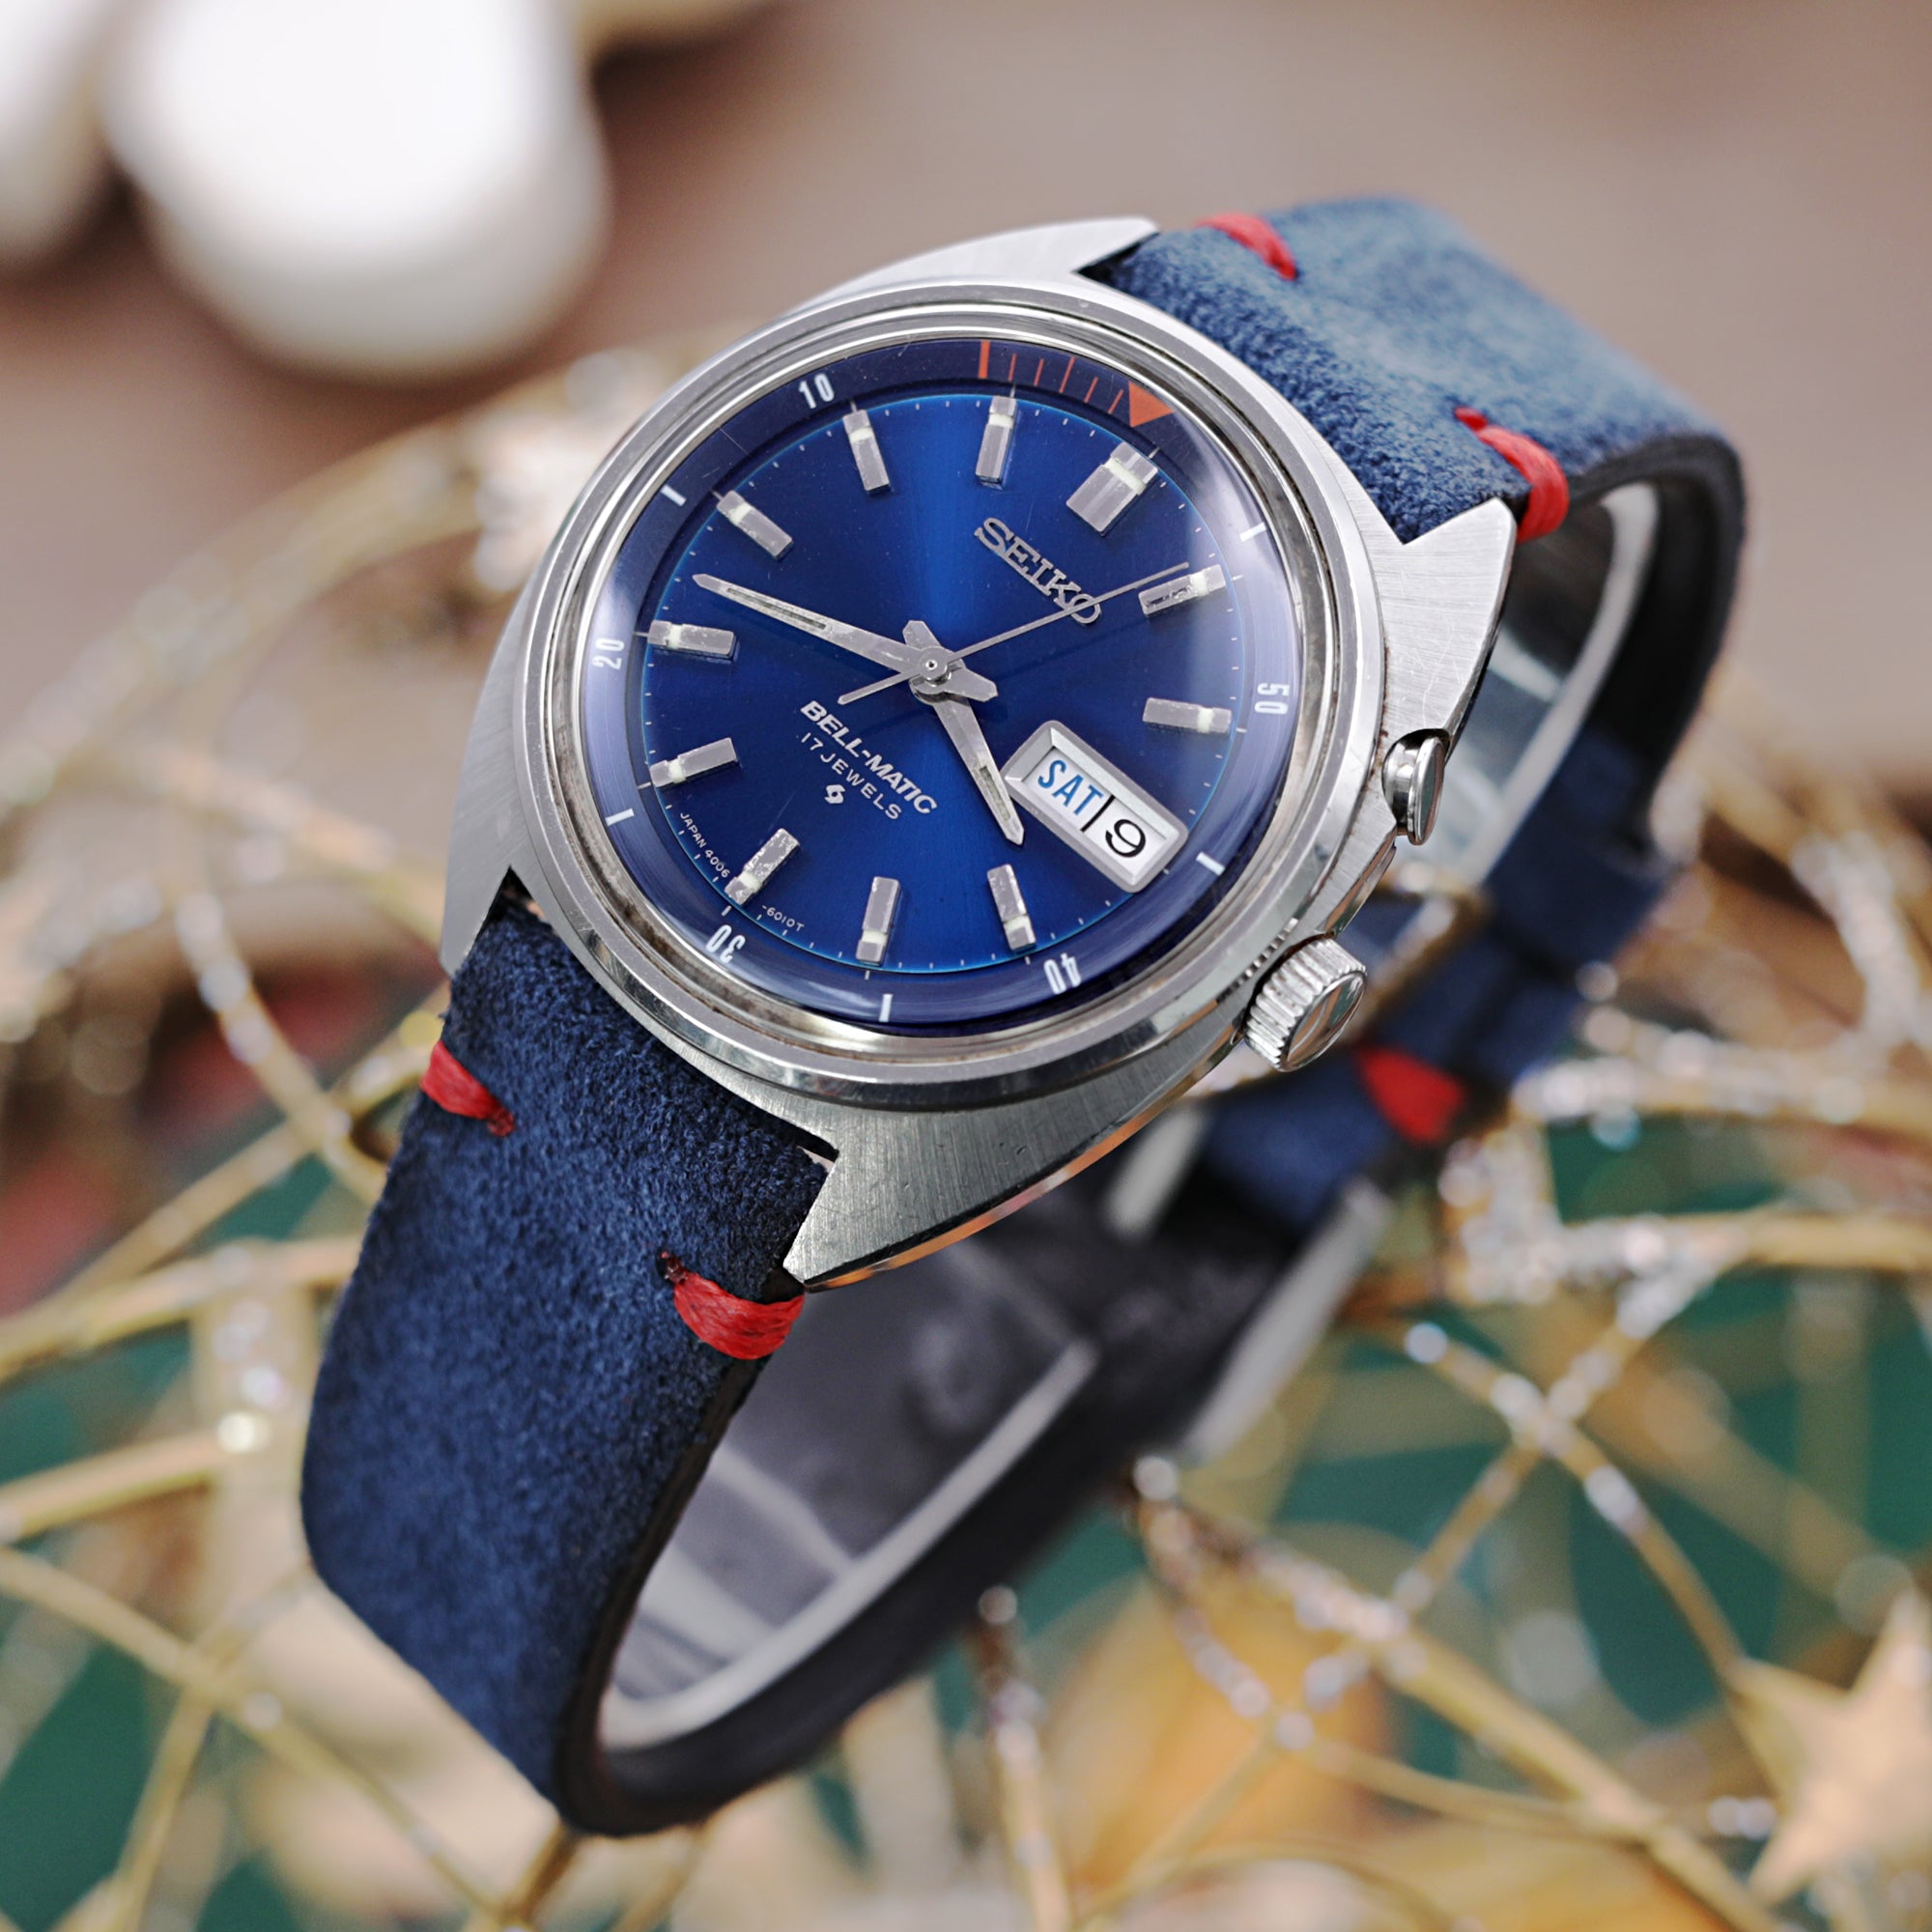 Strapcode 19mm Quick Release nubuck leather watch strap best matching with this blue vintage Seiko Bell-Matic